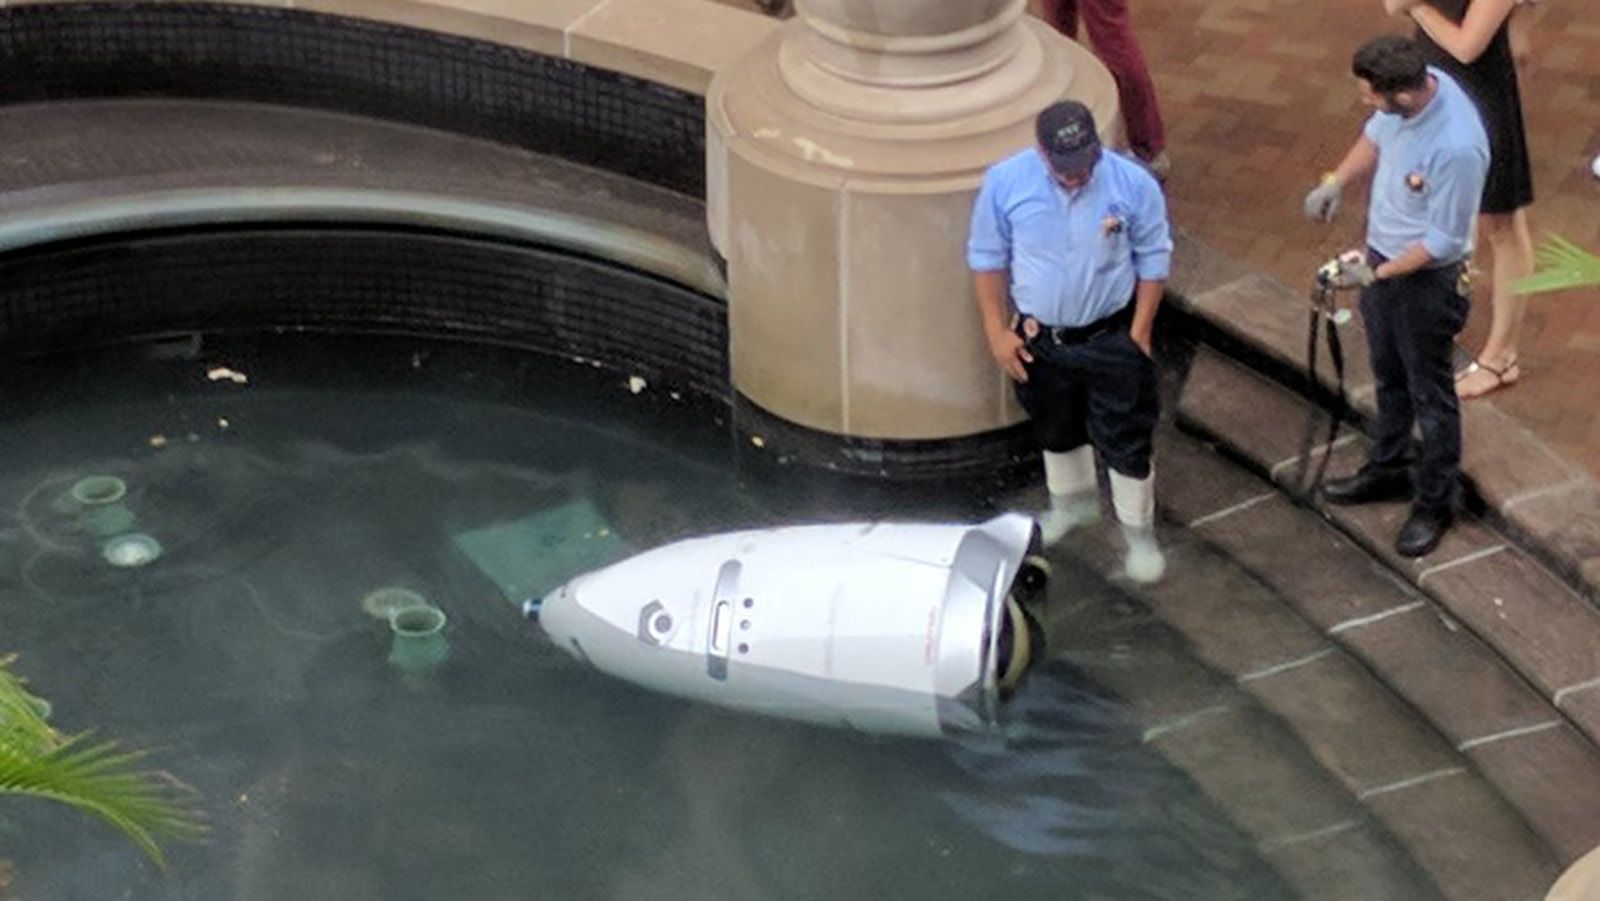 Security robot 'in critical condition' nearly drowning on the job | CNN